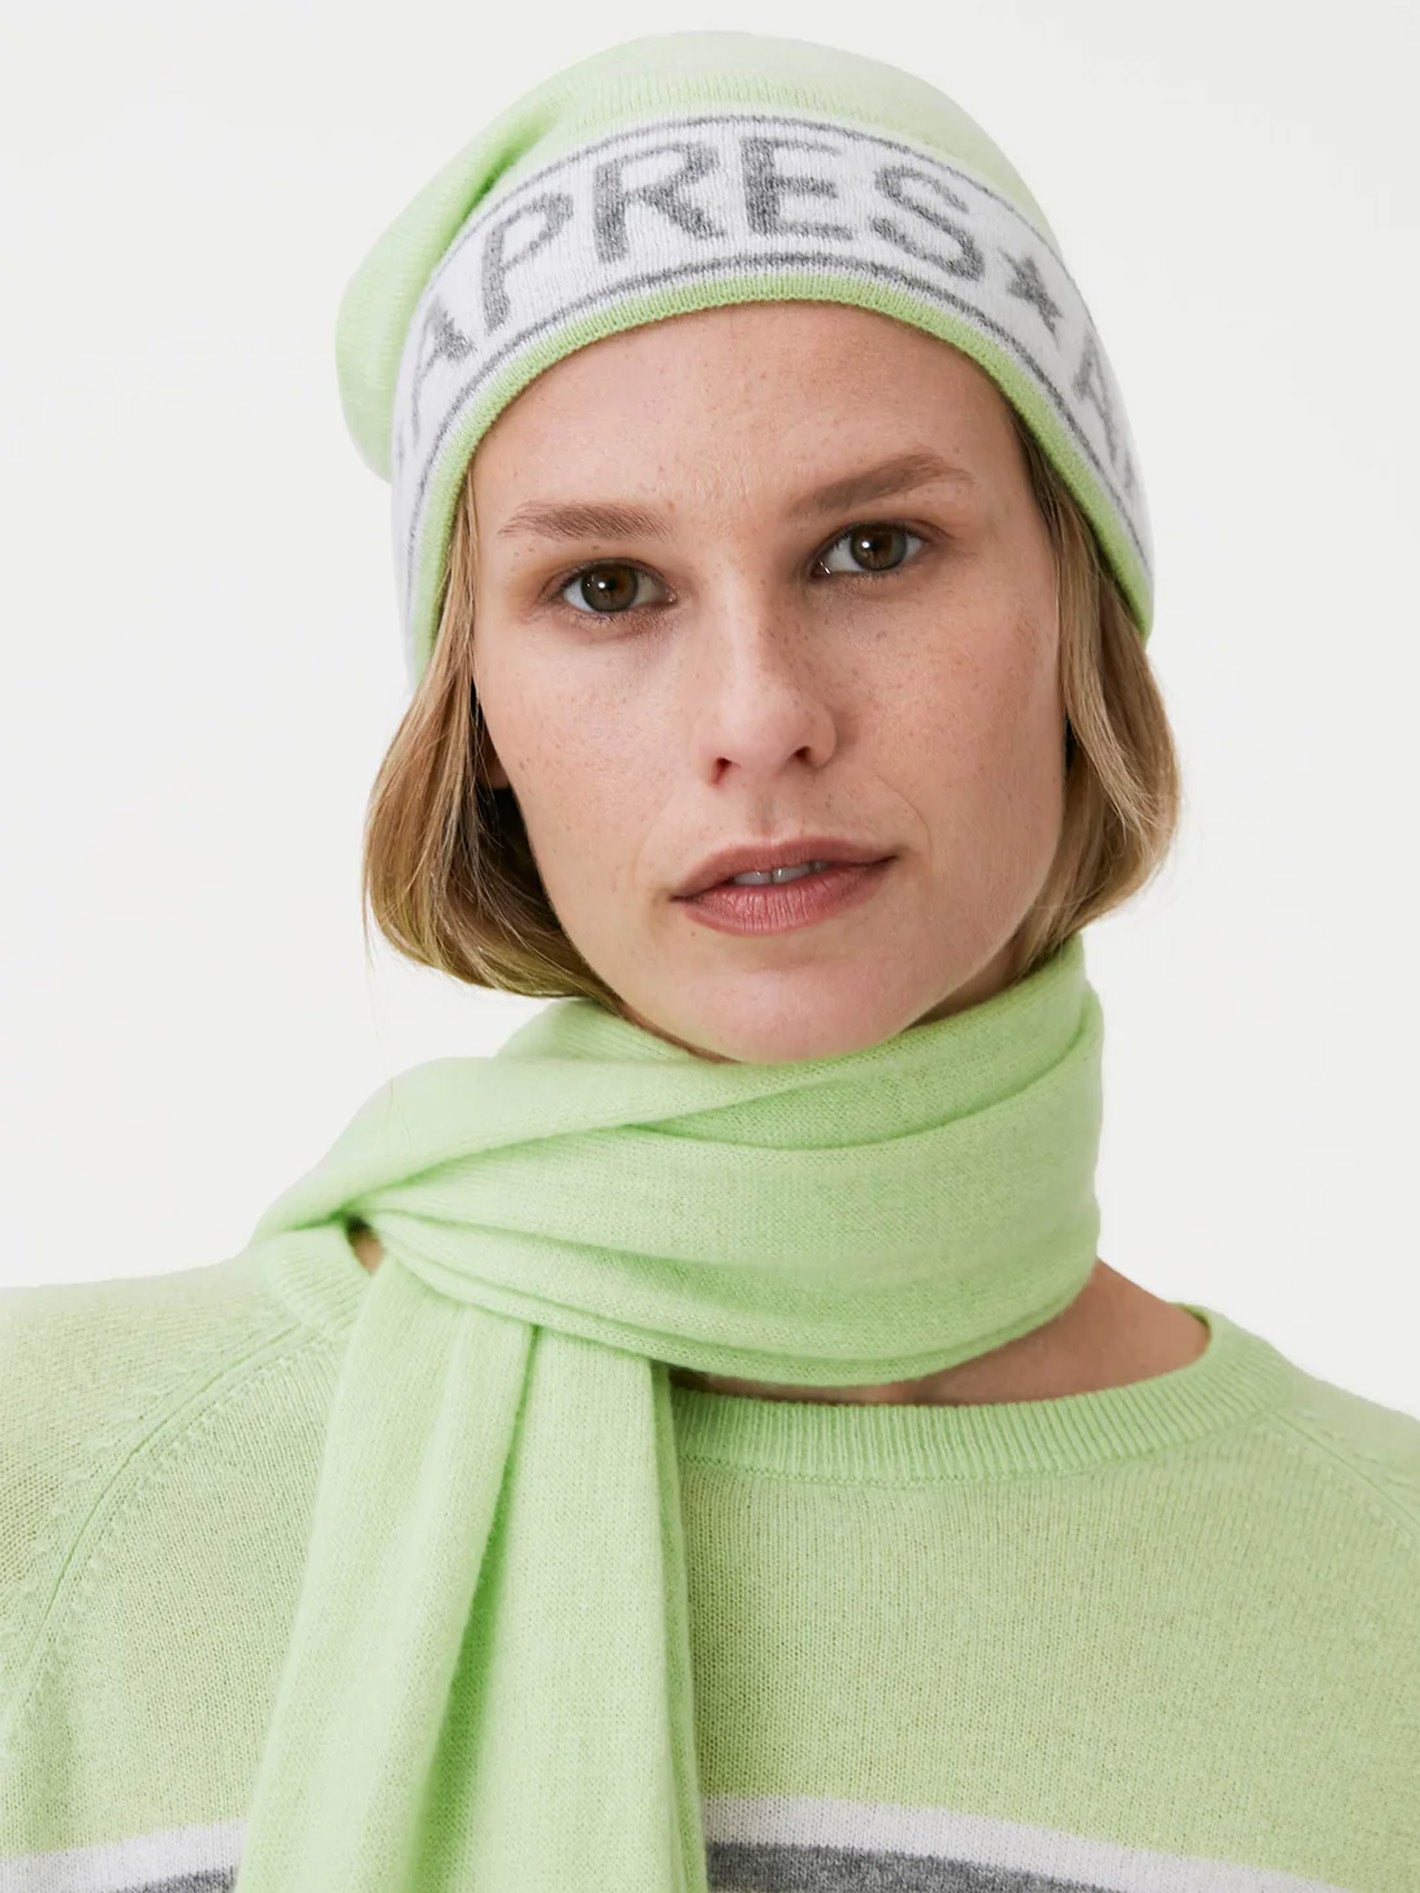 & | Brodie | Machine Sustainable Luxury Cashmere Cashmere Washable – Ethical